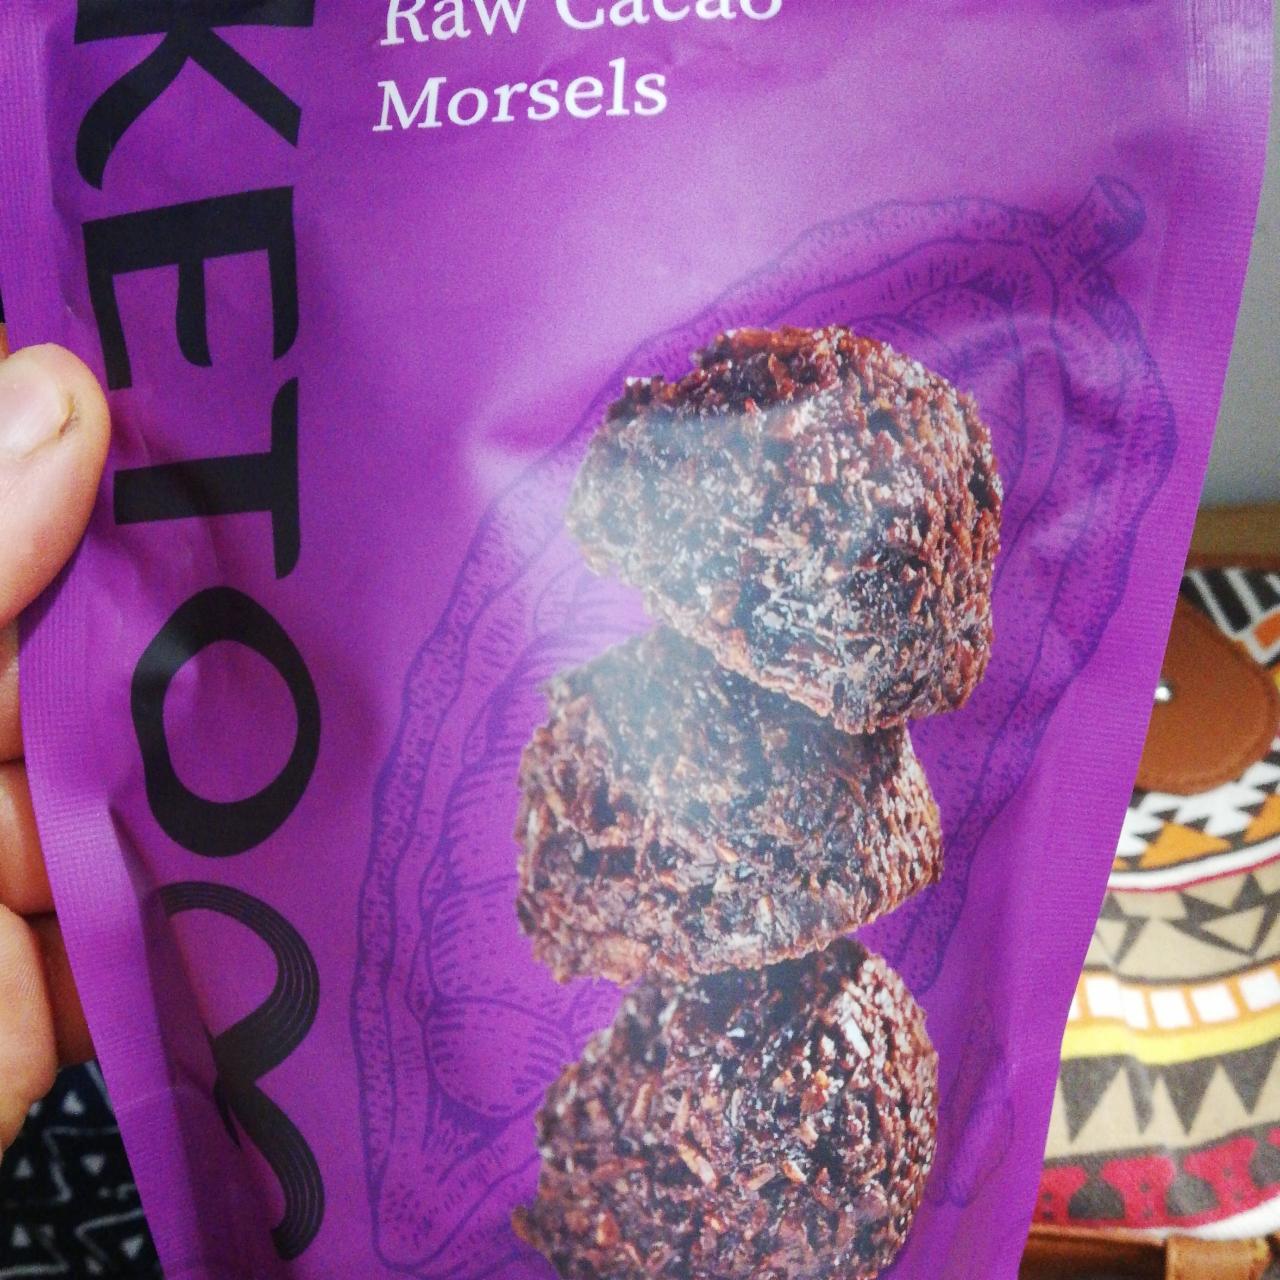 Fotografie - Keto Raw Cacao Morsels 8Foods